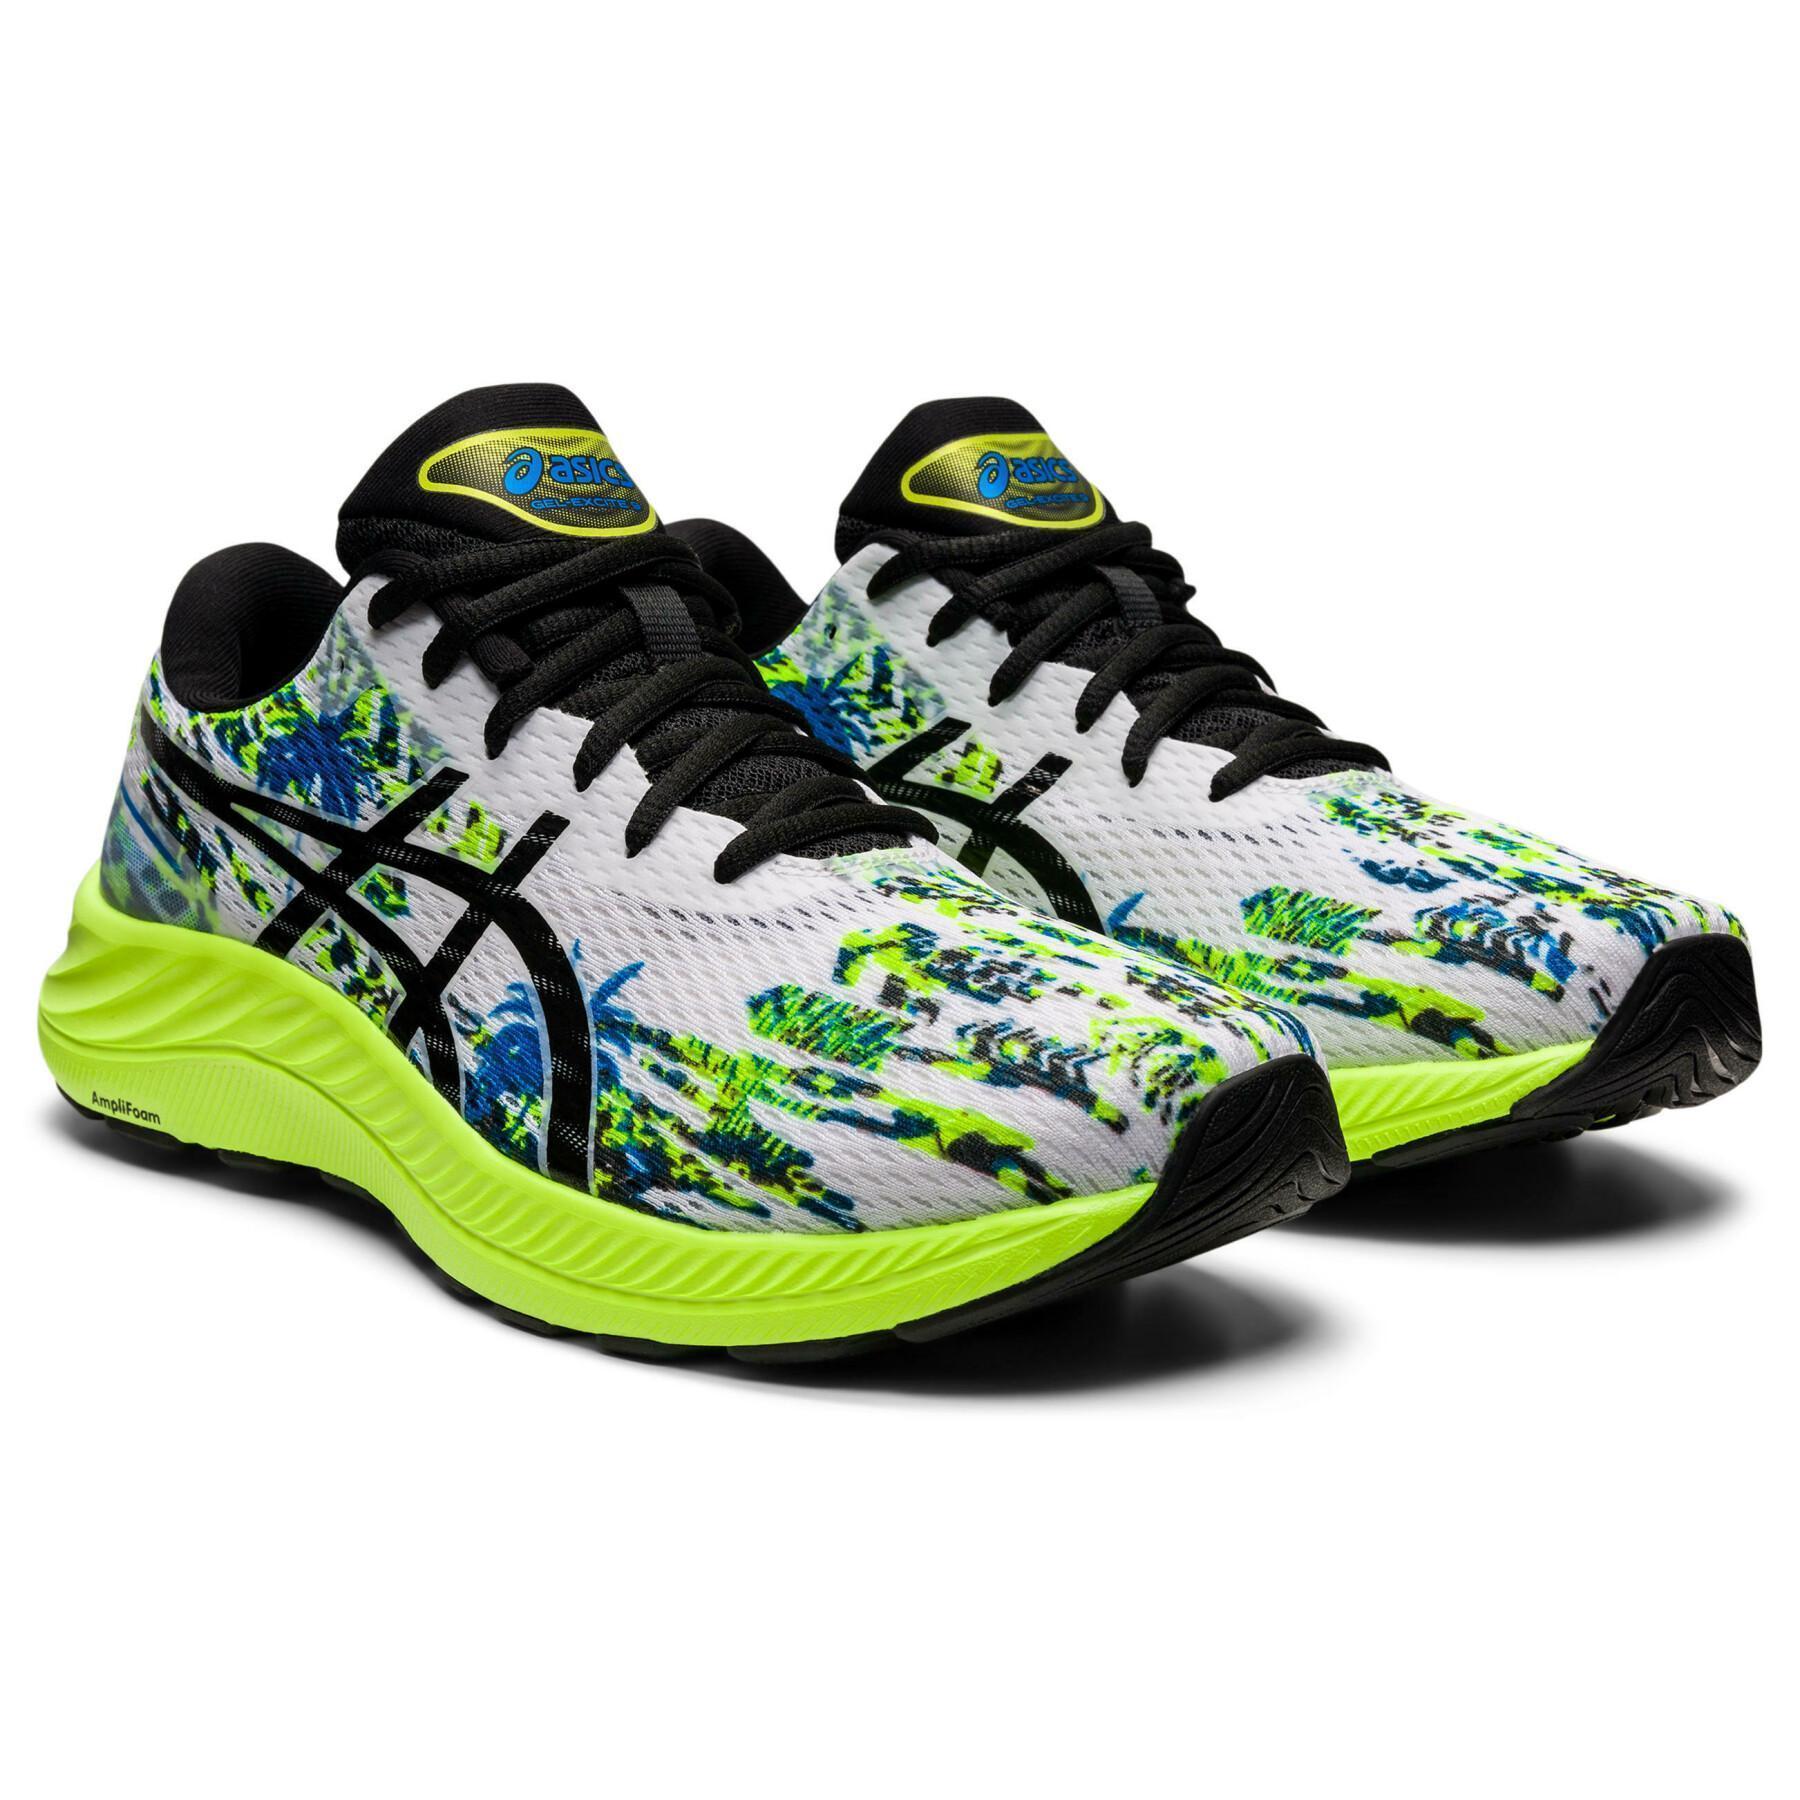 Shoes Asics Gel-Excite 9